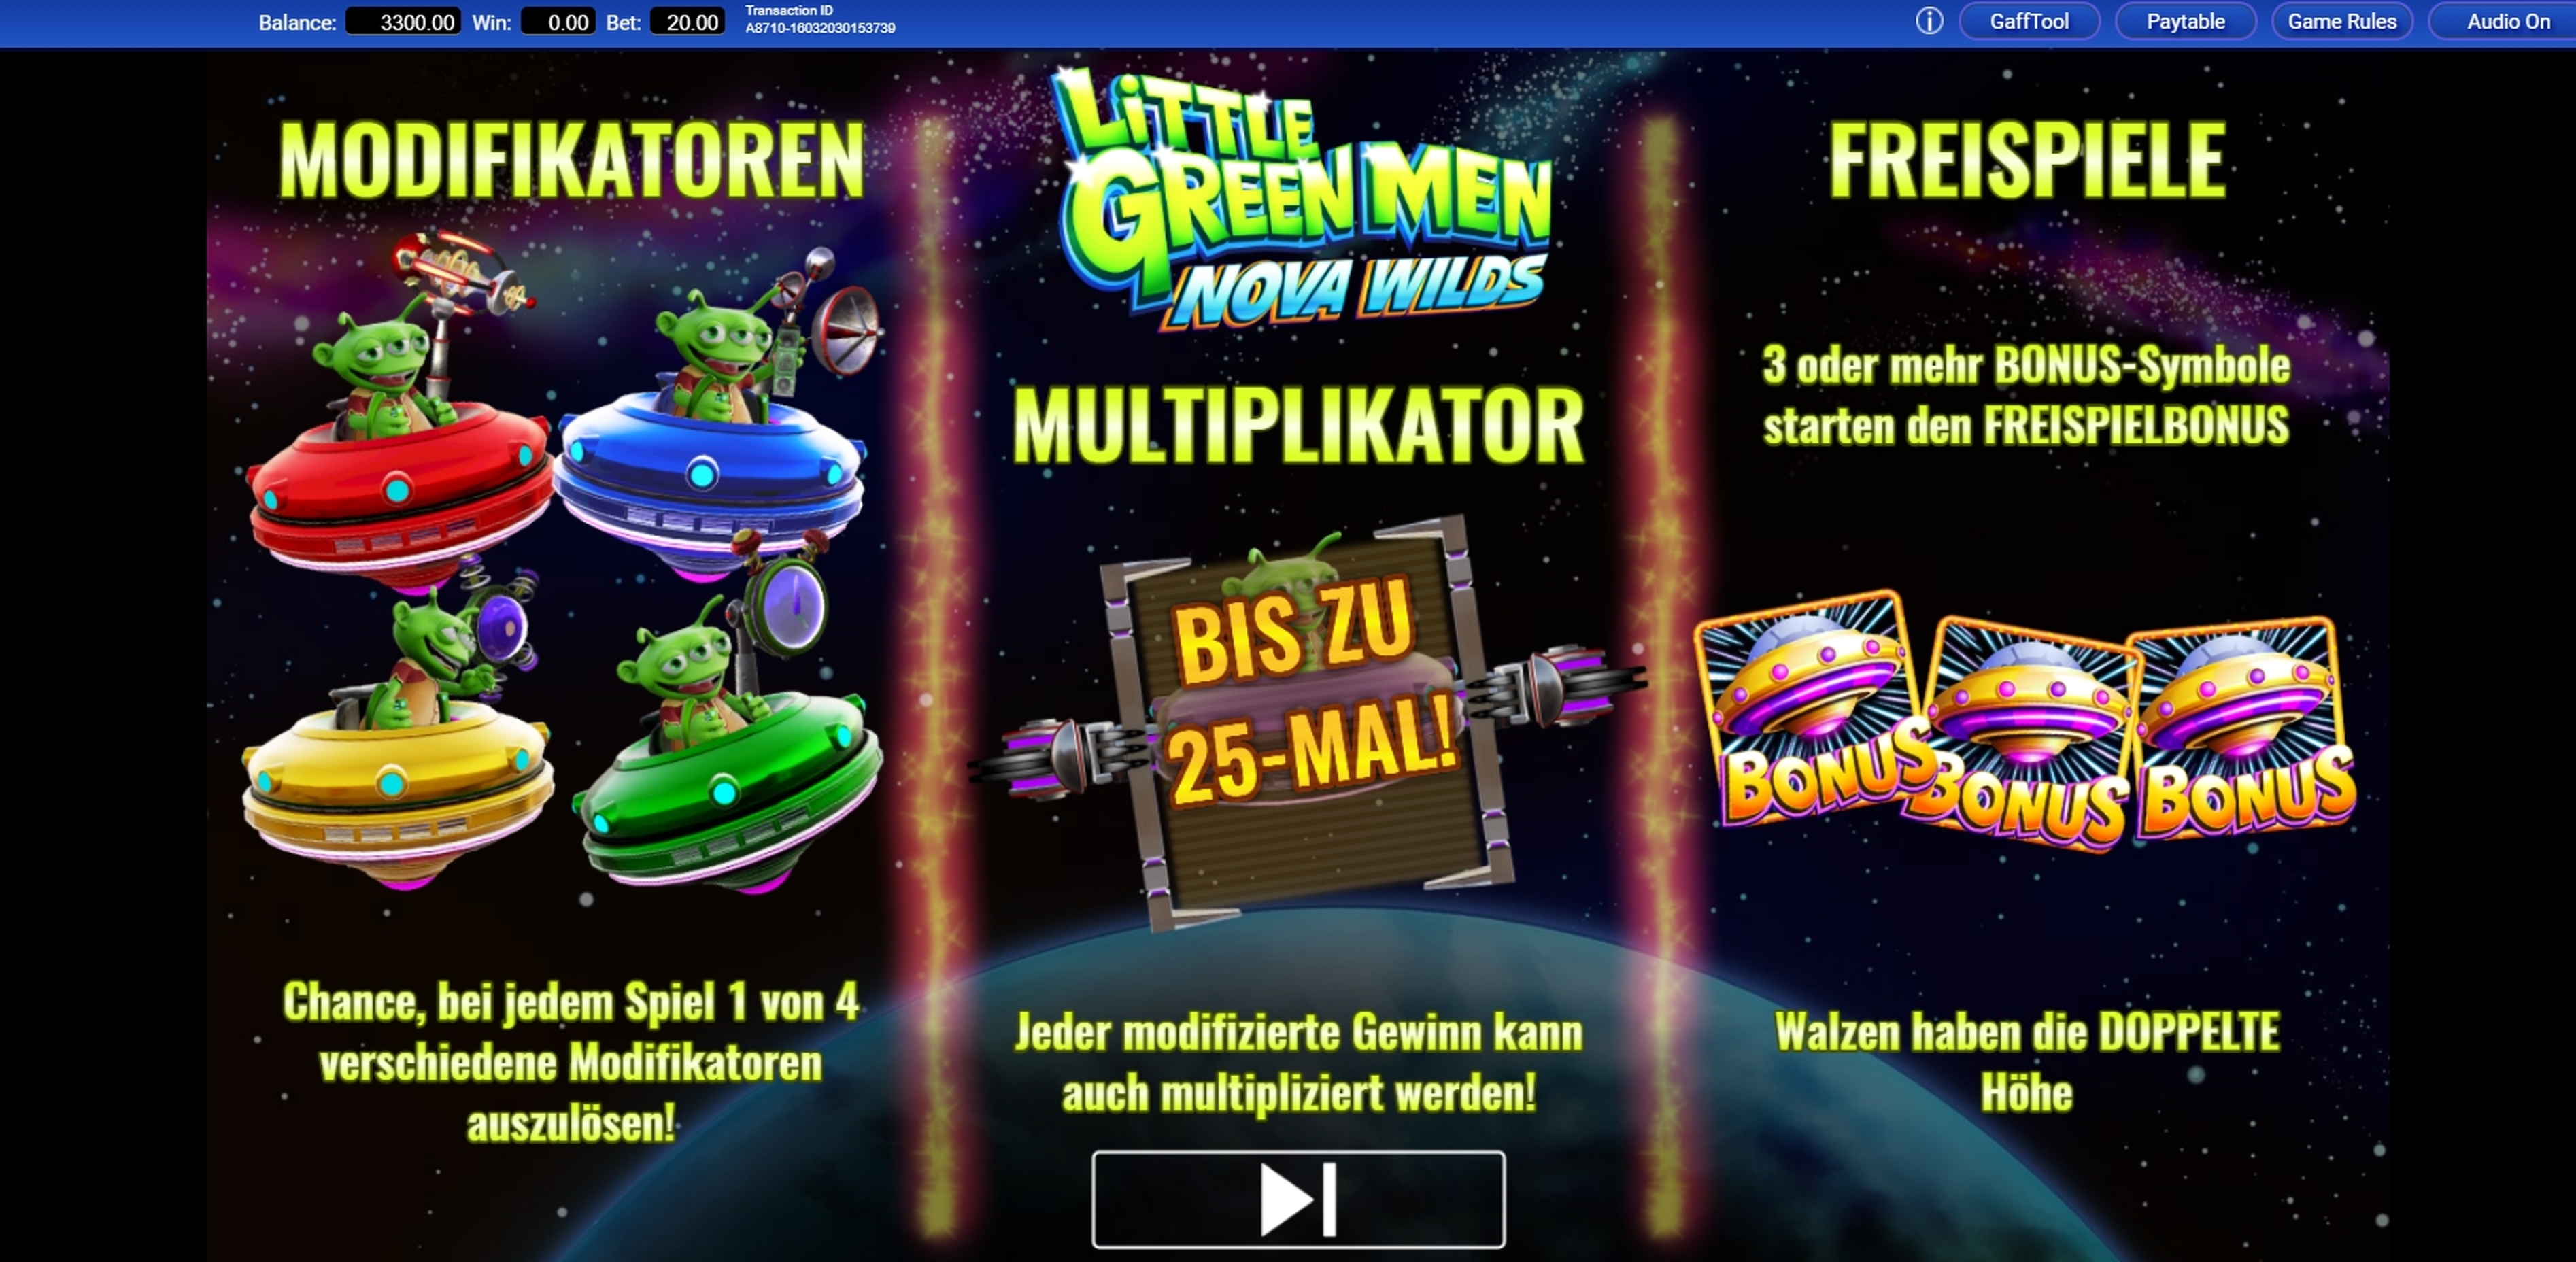 Play Little Green Men Nova Wilds Free Casino Slot Game by IGT